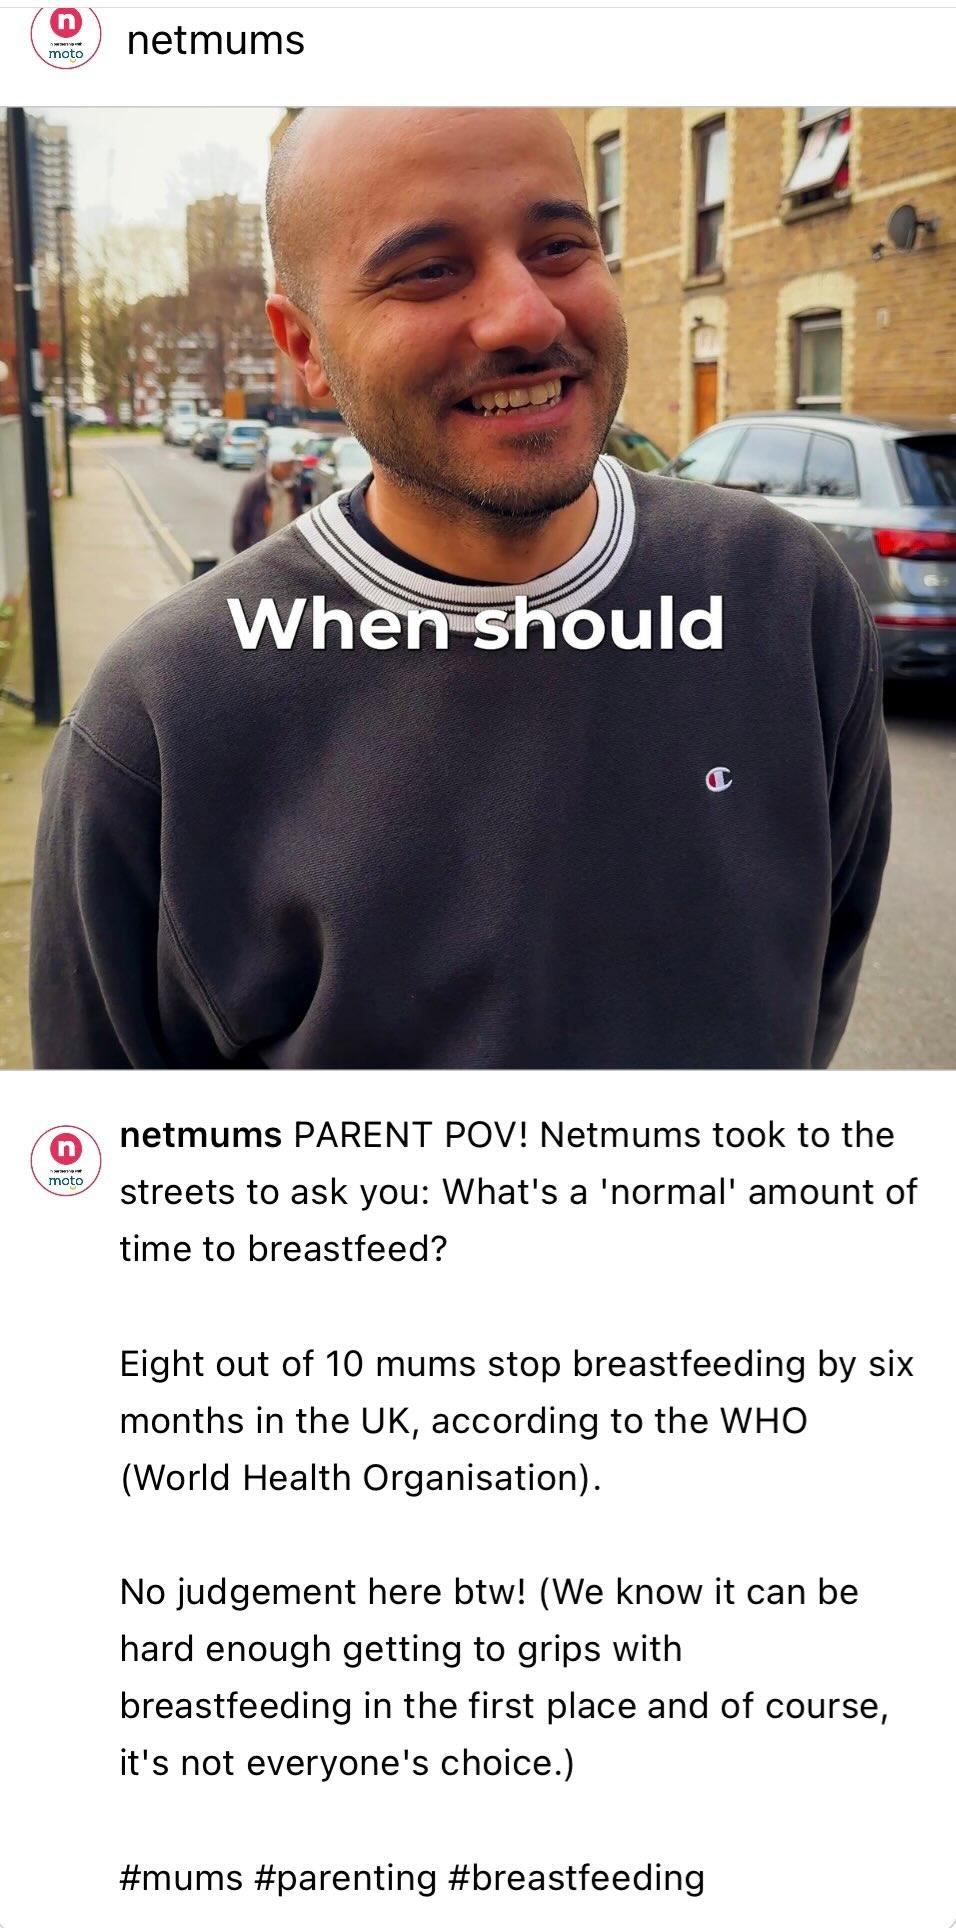 Screenshot of the now-deleted Netmums Instagram post about breastfeeding